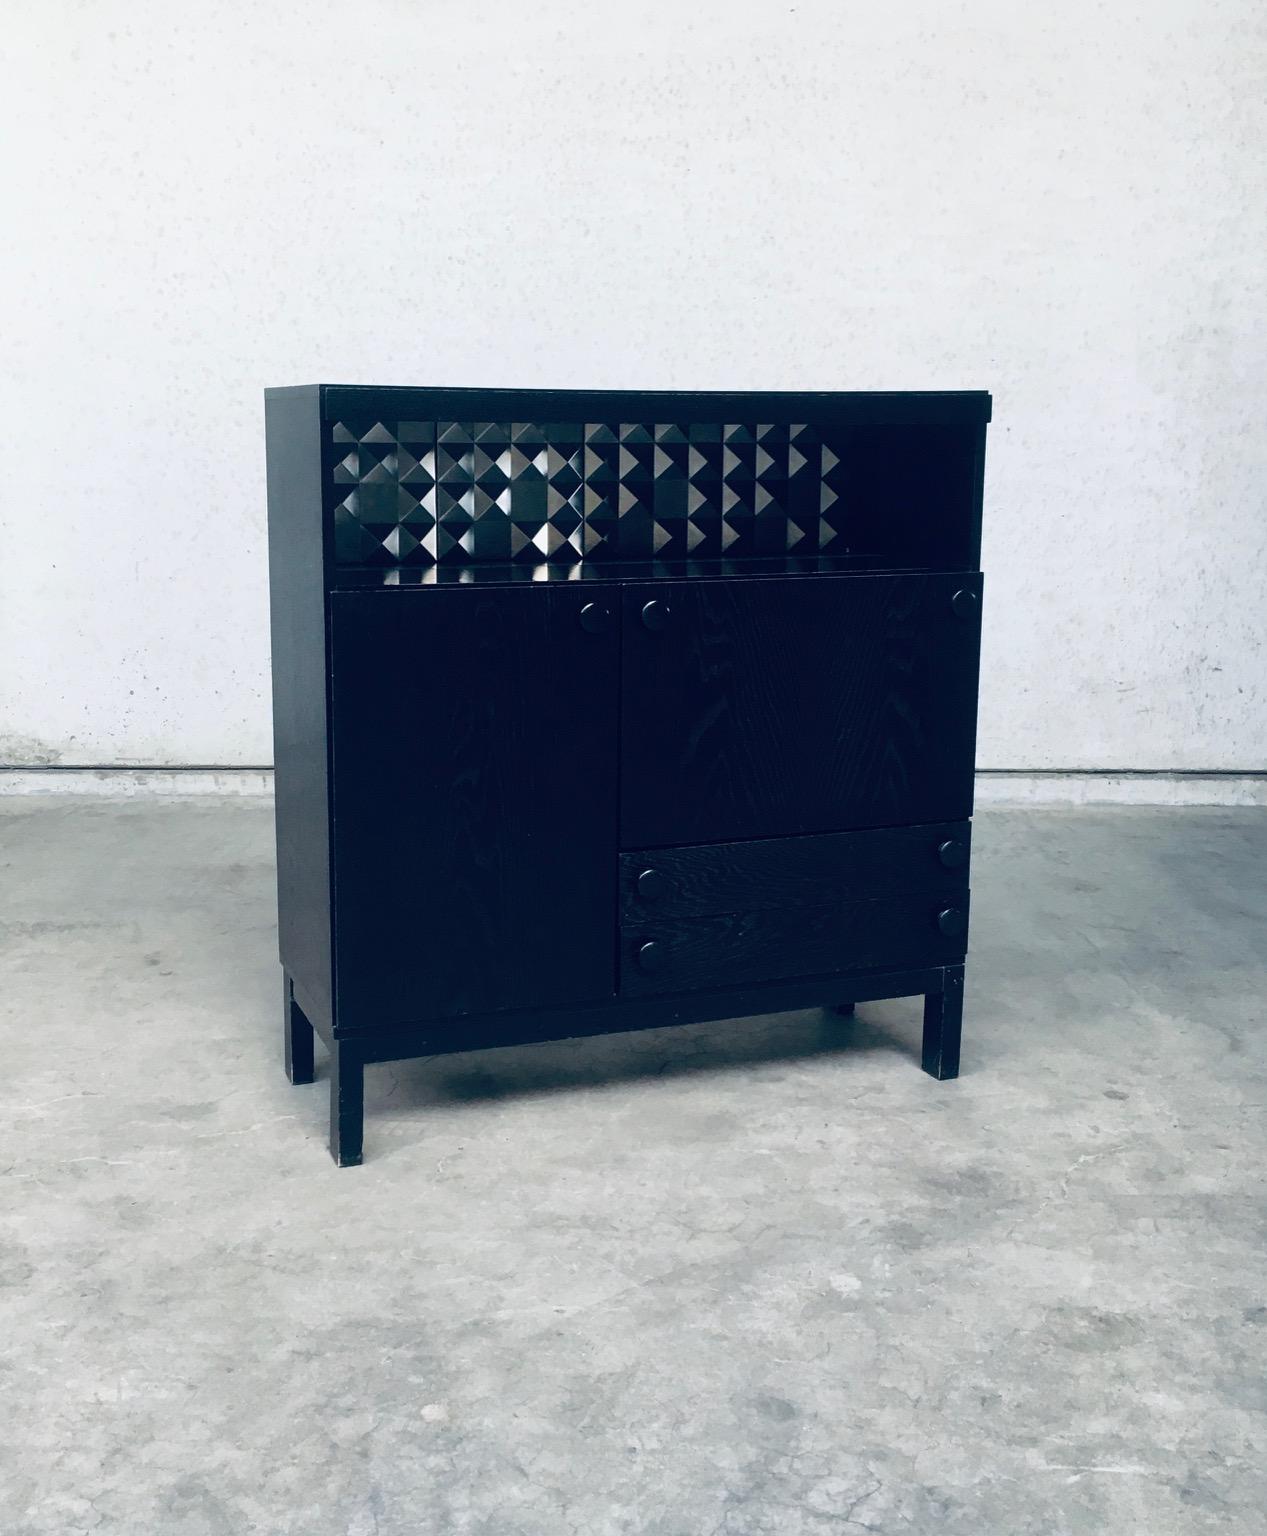 Brutalist Belgian Design Black Ebonized Dry Bar Cabinet. Made in Belgium, 1970's period. No maker markings. In the manner of De Coene Frères Mfg. Black ebonized stained oak with aluminum graphic diamond pattern back plates and back light. This has a